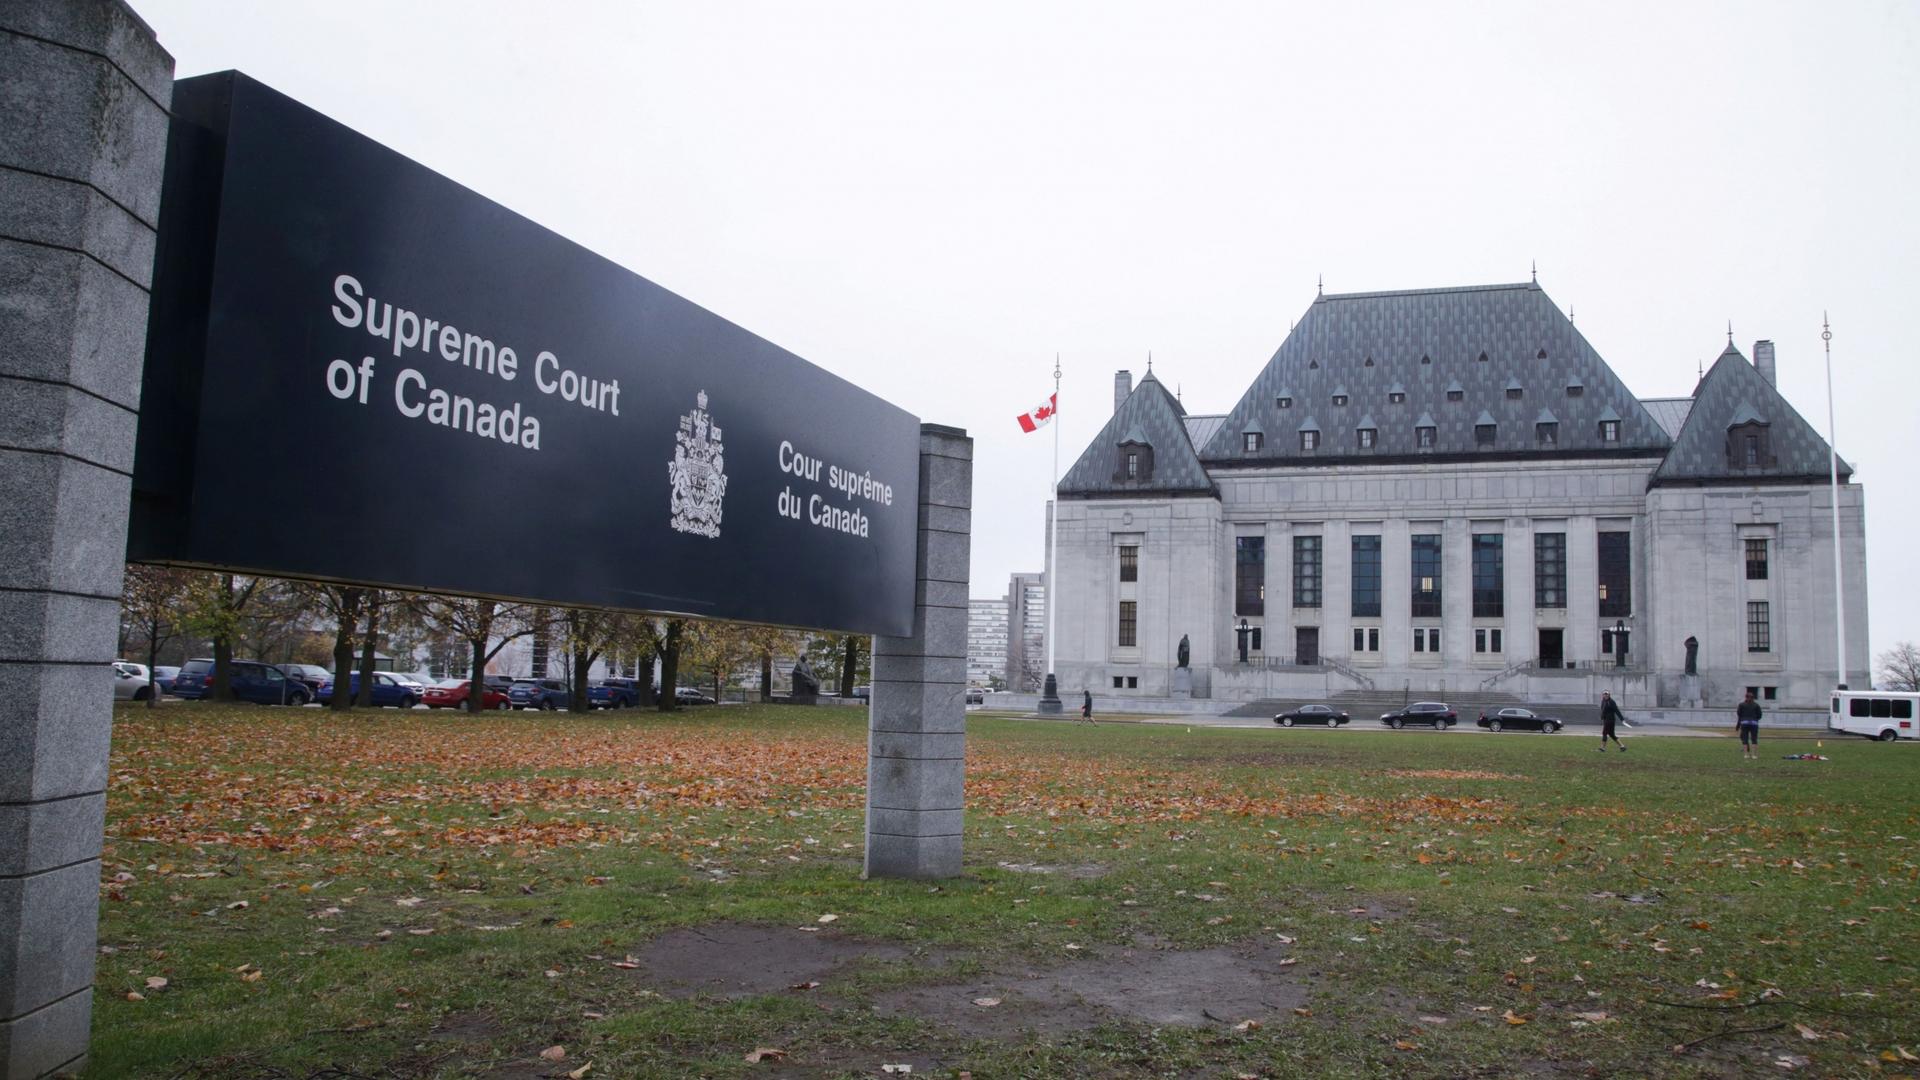 The Supreme Court of Canada is seen in Ottawa, Ontario, Canada, Nov. 4, 2019. 